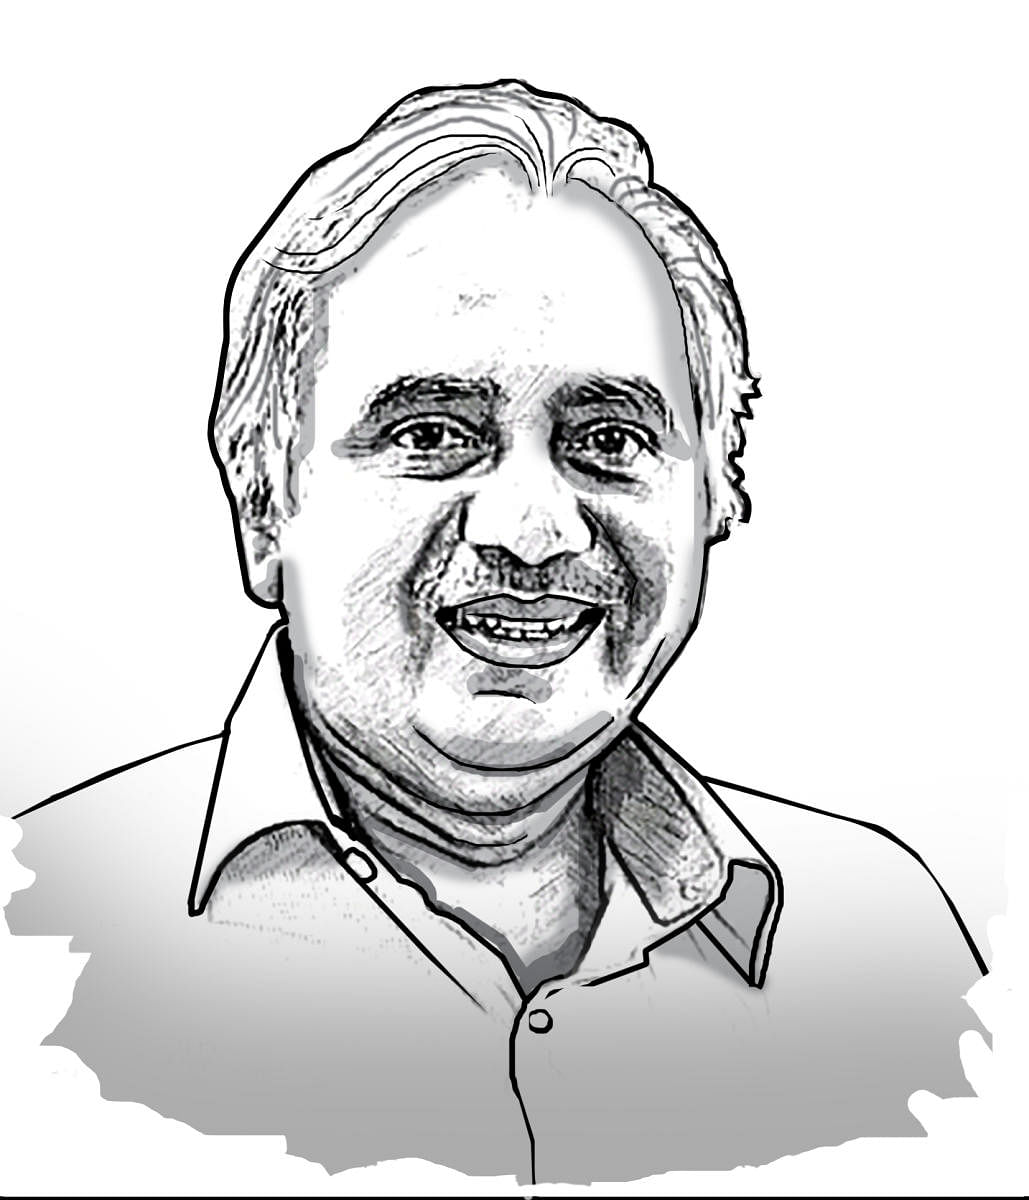 Seshadri Chari reads between the lines on big national and international developments from his vantage point in the BJP National Executive and the RSS@seshadrichari